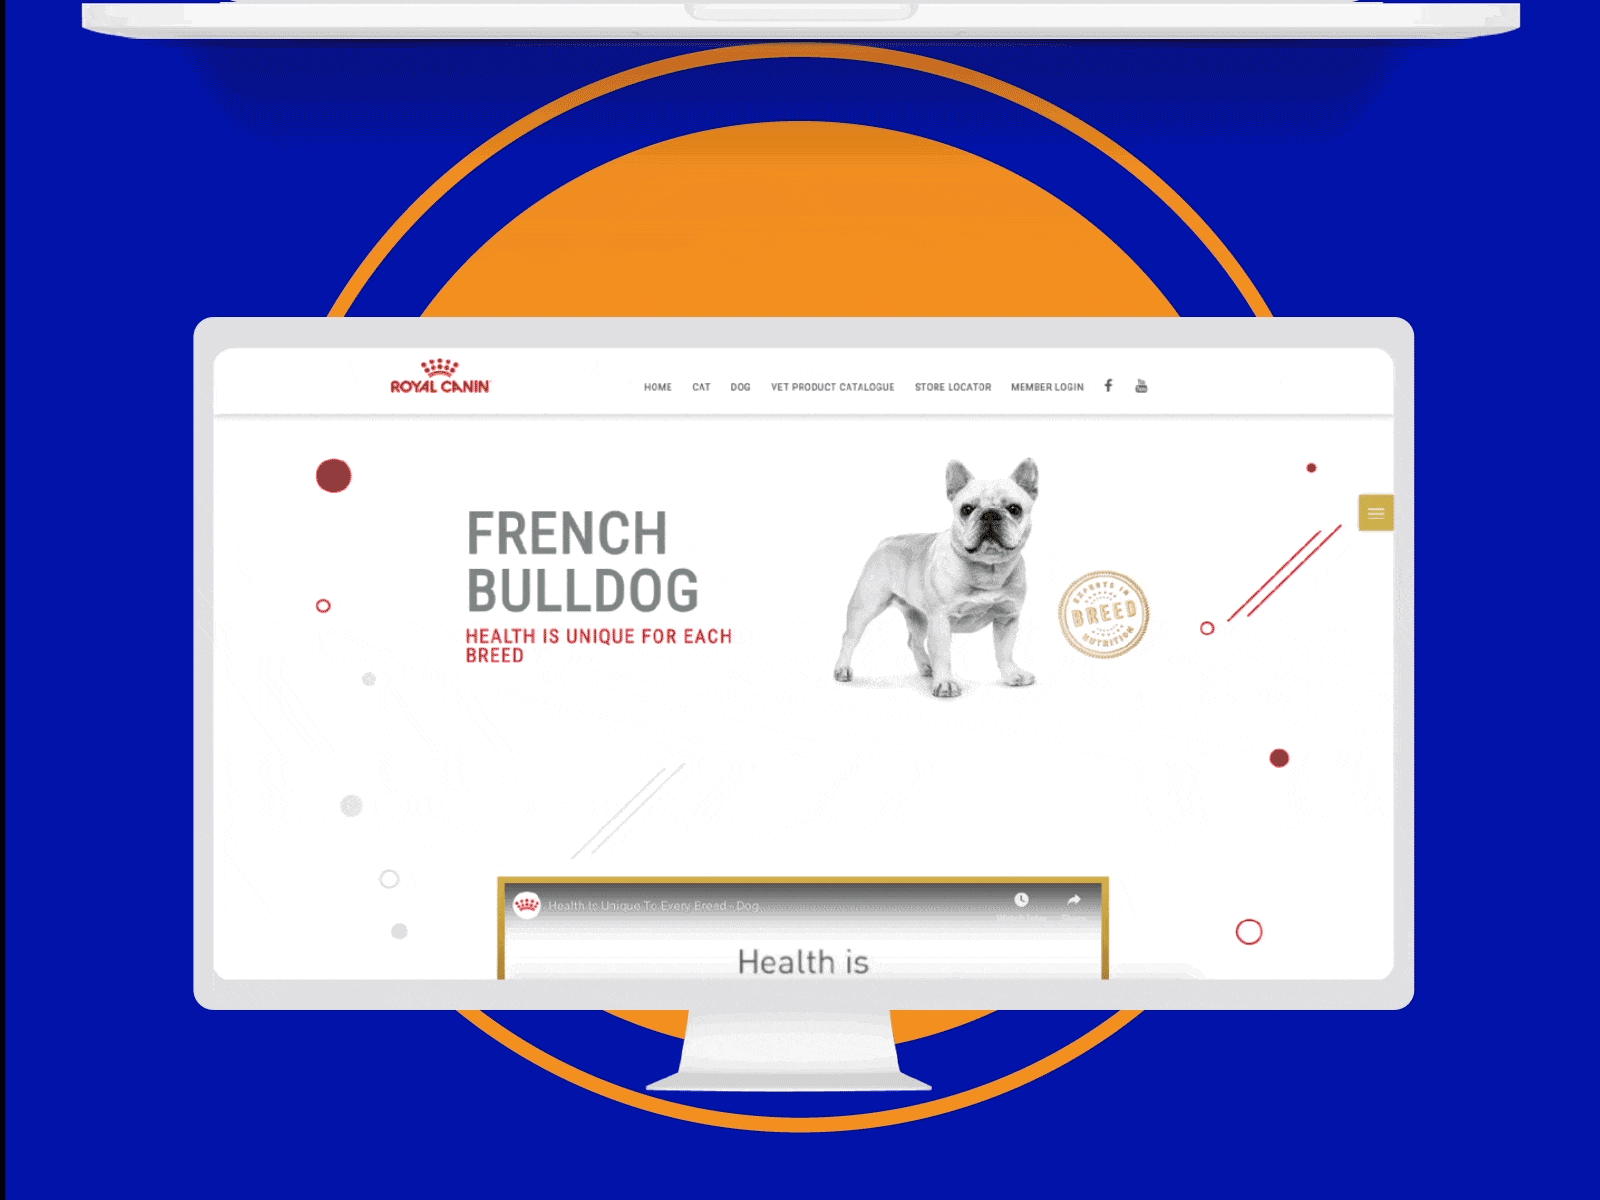 Royal Canin breed campaign microsite responsive design animated transformation view on desktop, mobile and tablet